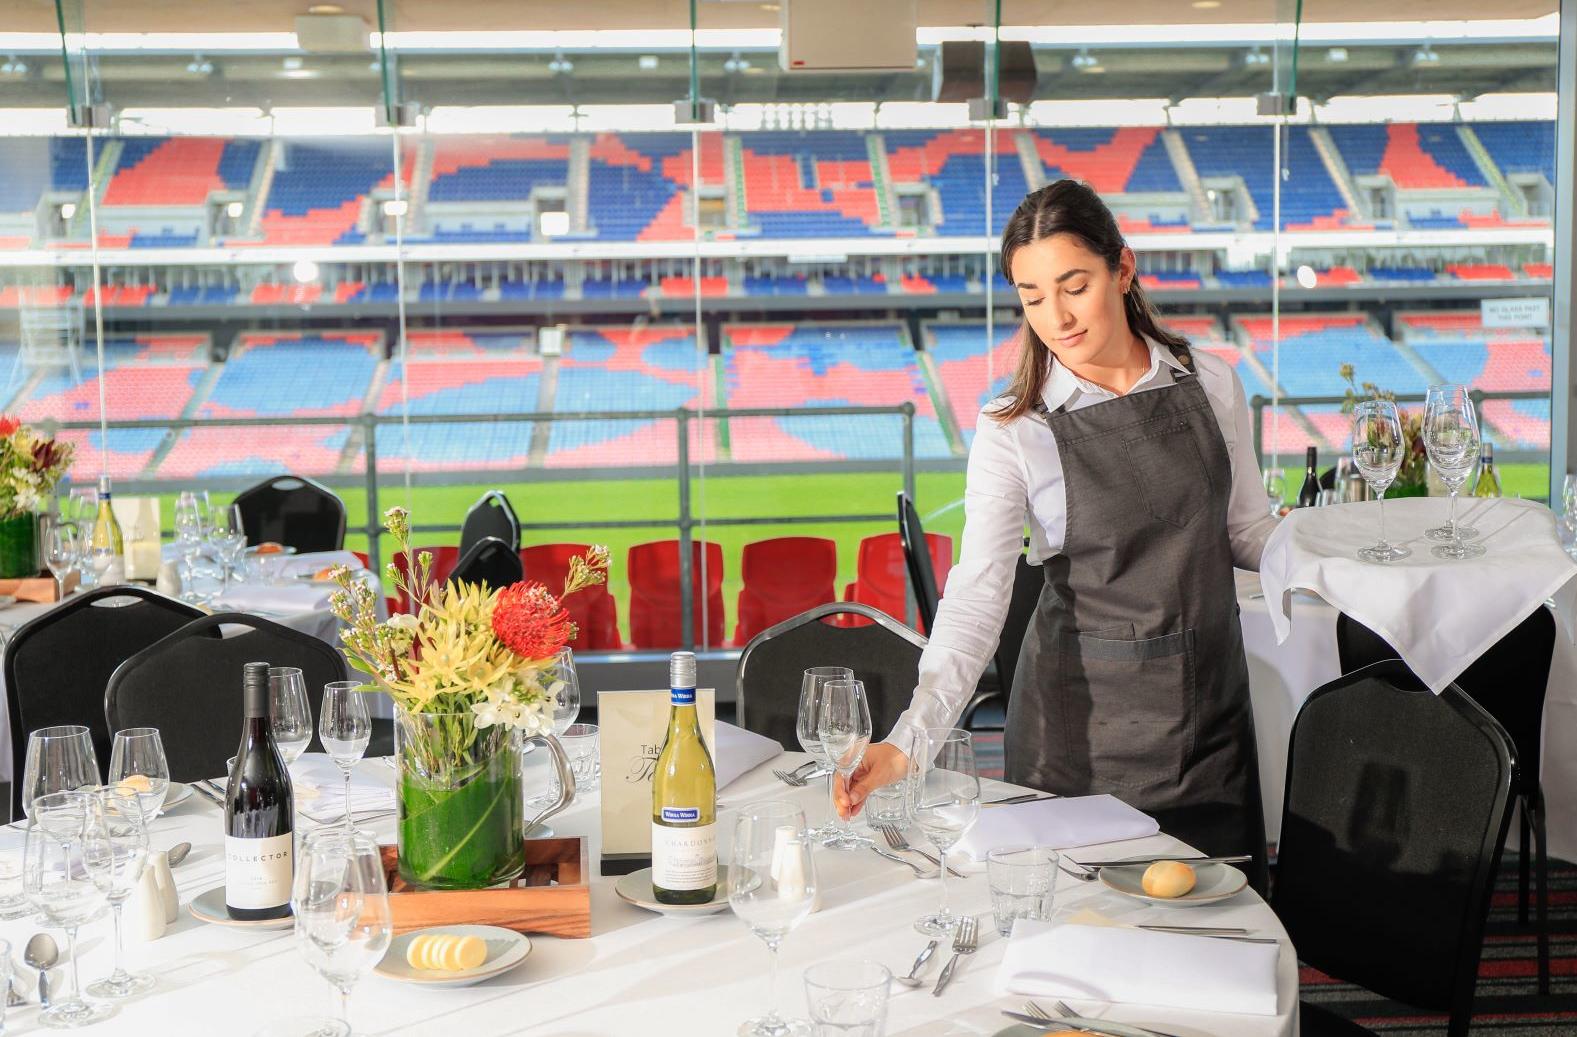 Image of a banquet table, dressed for a formal meal including a native floral centerpiece. The background shows the view of the Stadium through the window. A Service Staff member is holding a bar tray with wine glass and is placing one on the table